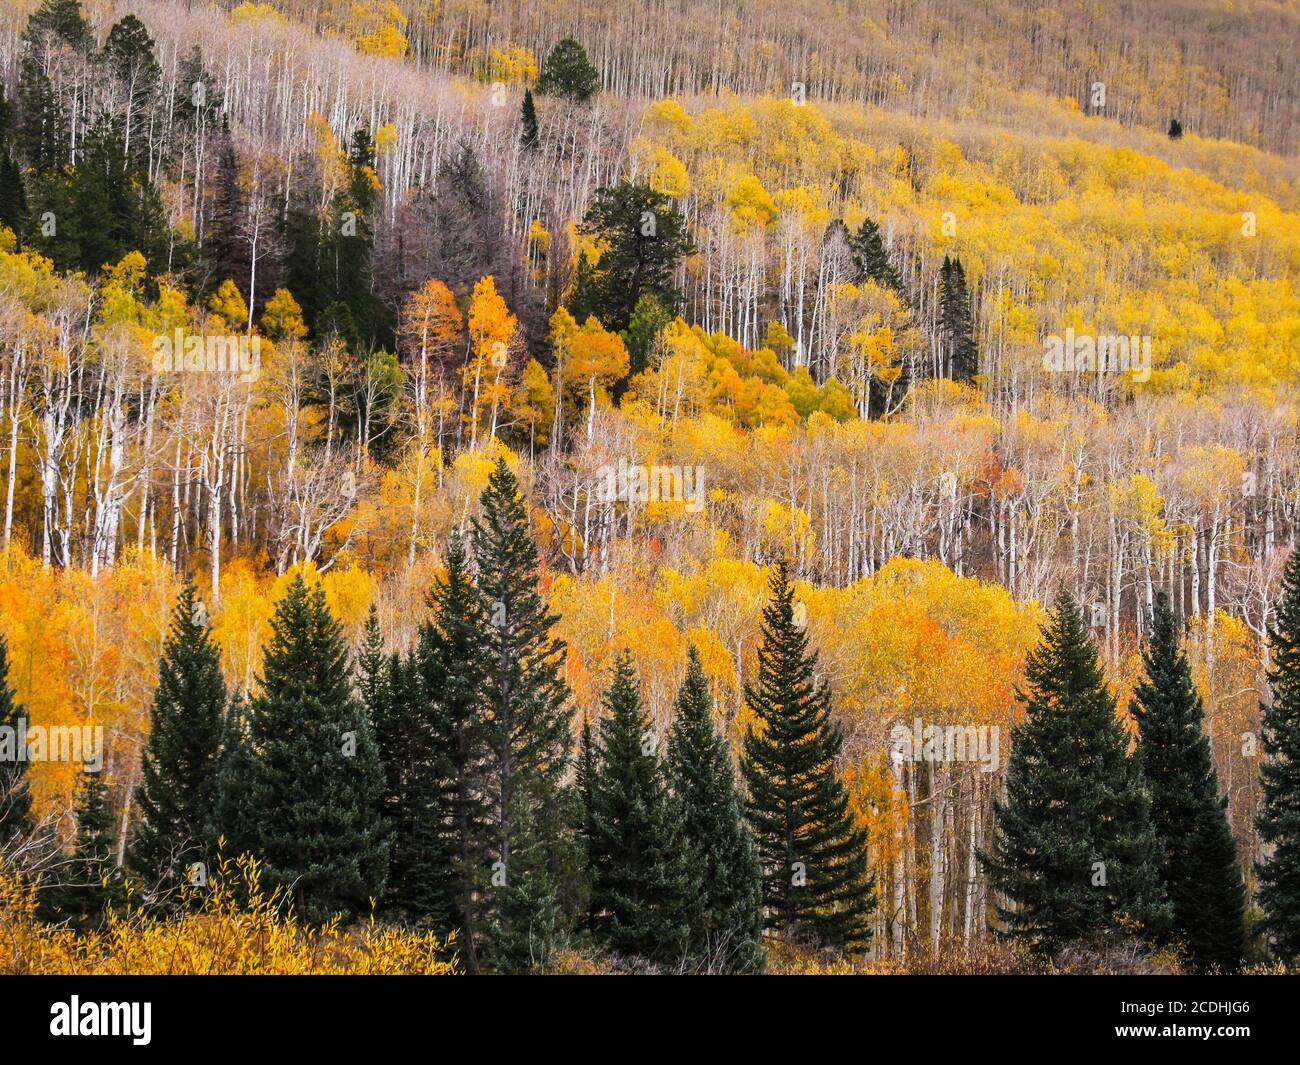 The slopes of the La Sal Mountains of Utah, USA, coverd in fall forests of yellow colored quaking aspen, and evergreen, Douglas-firs, Stock Photo